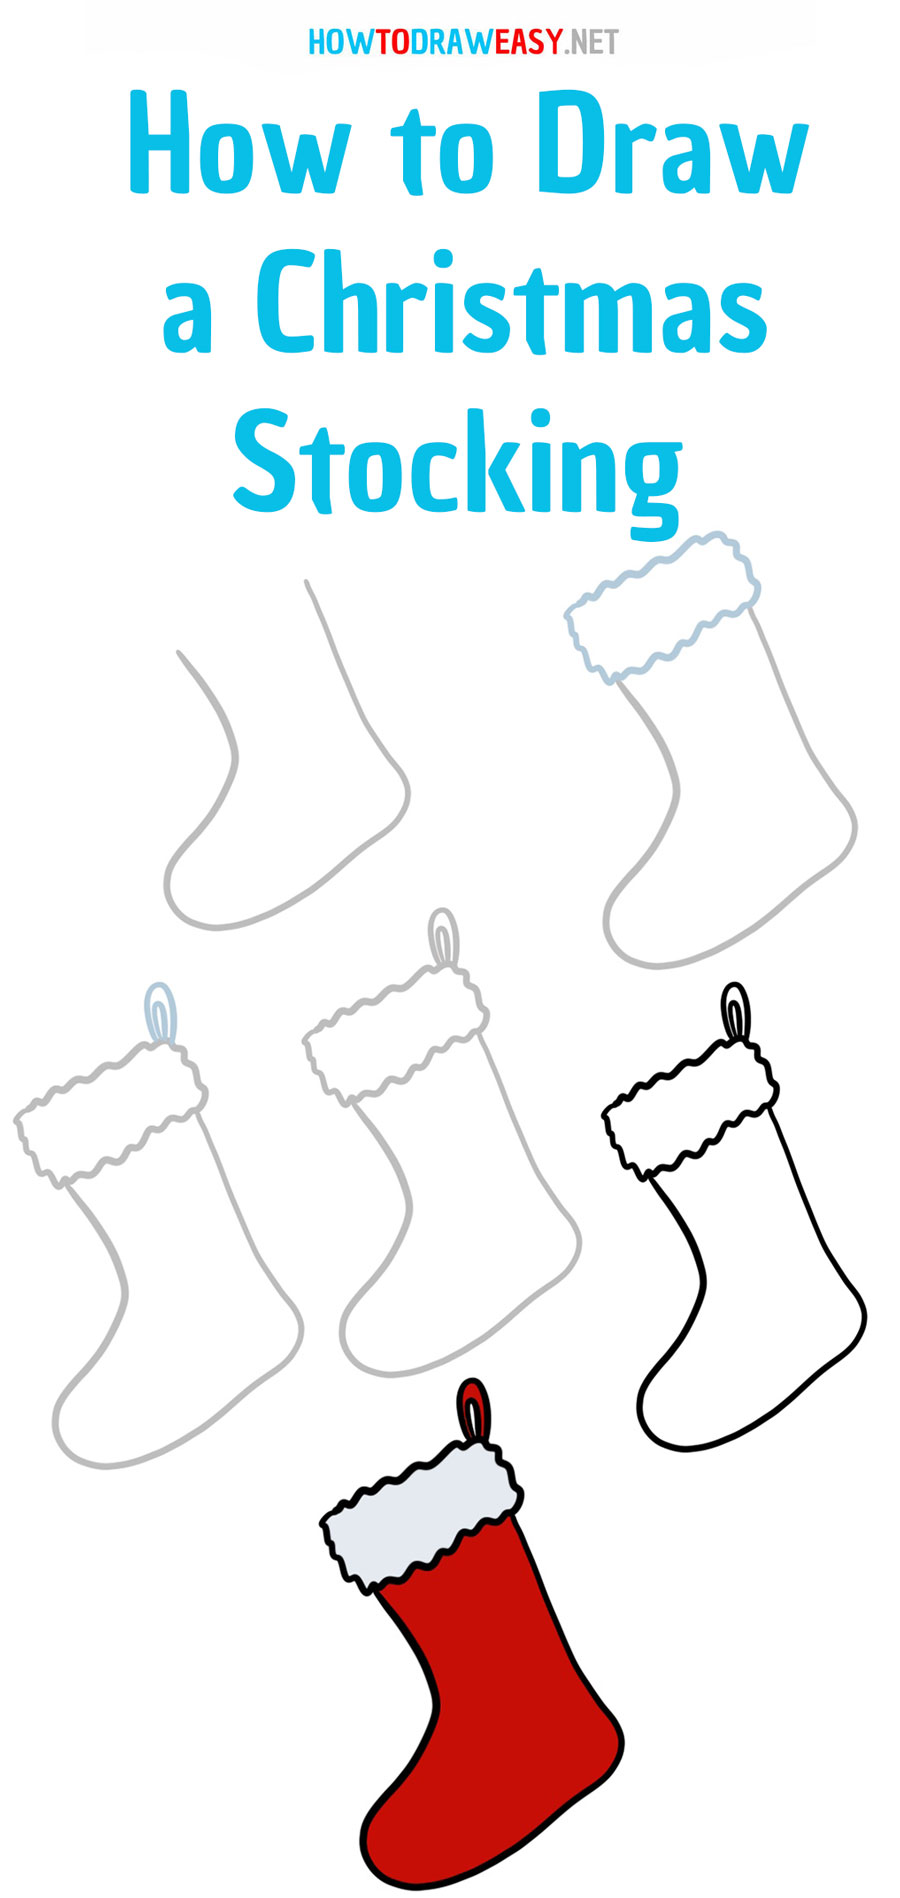 how-to-draw-a-christmas-stocking-step-by-step